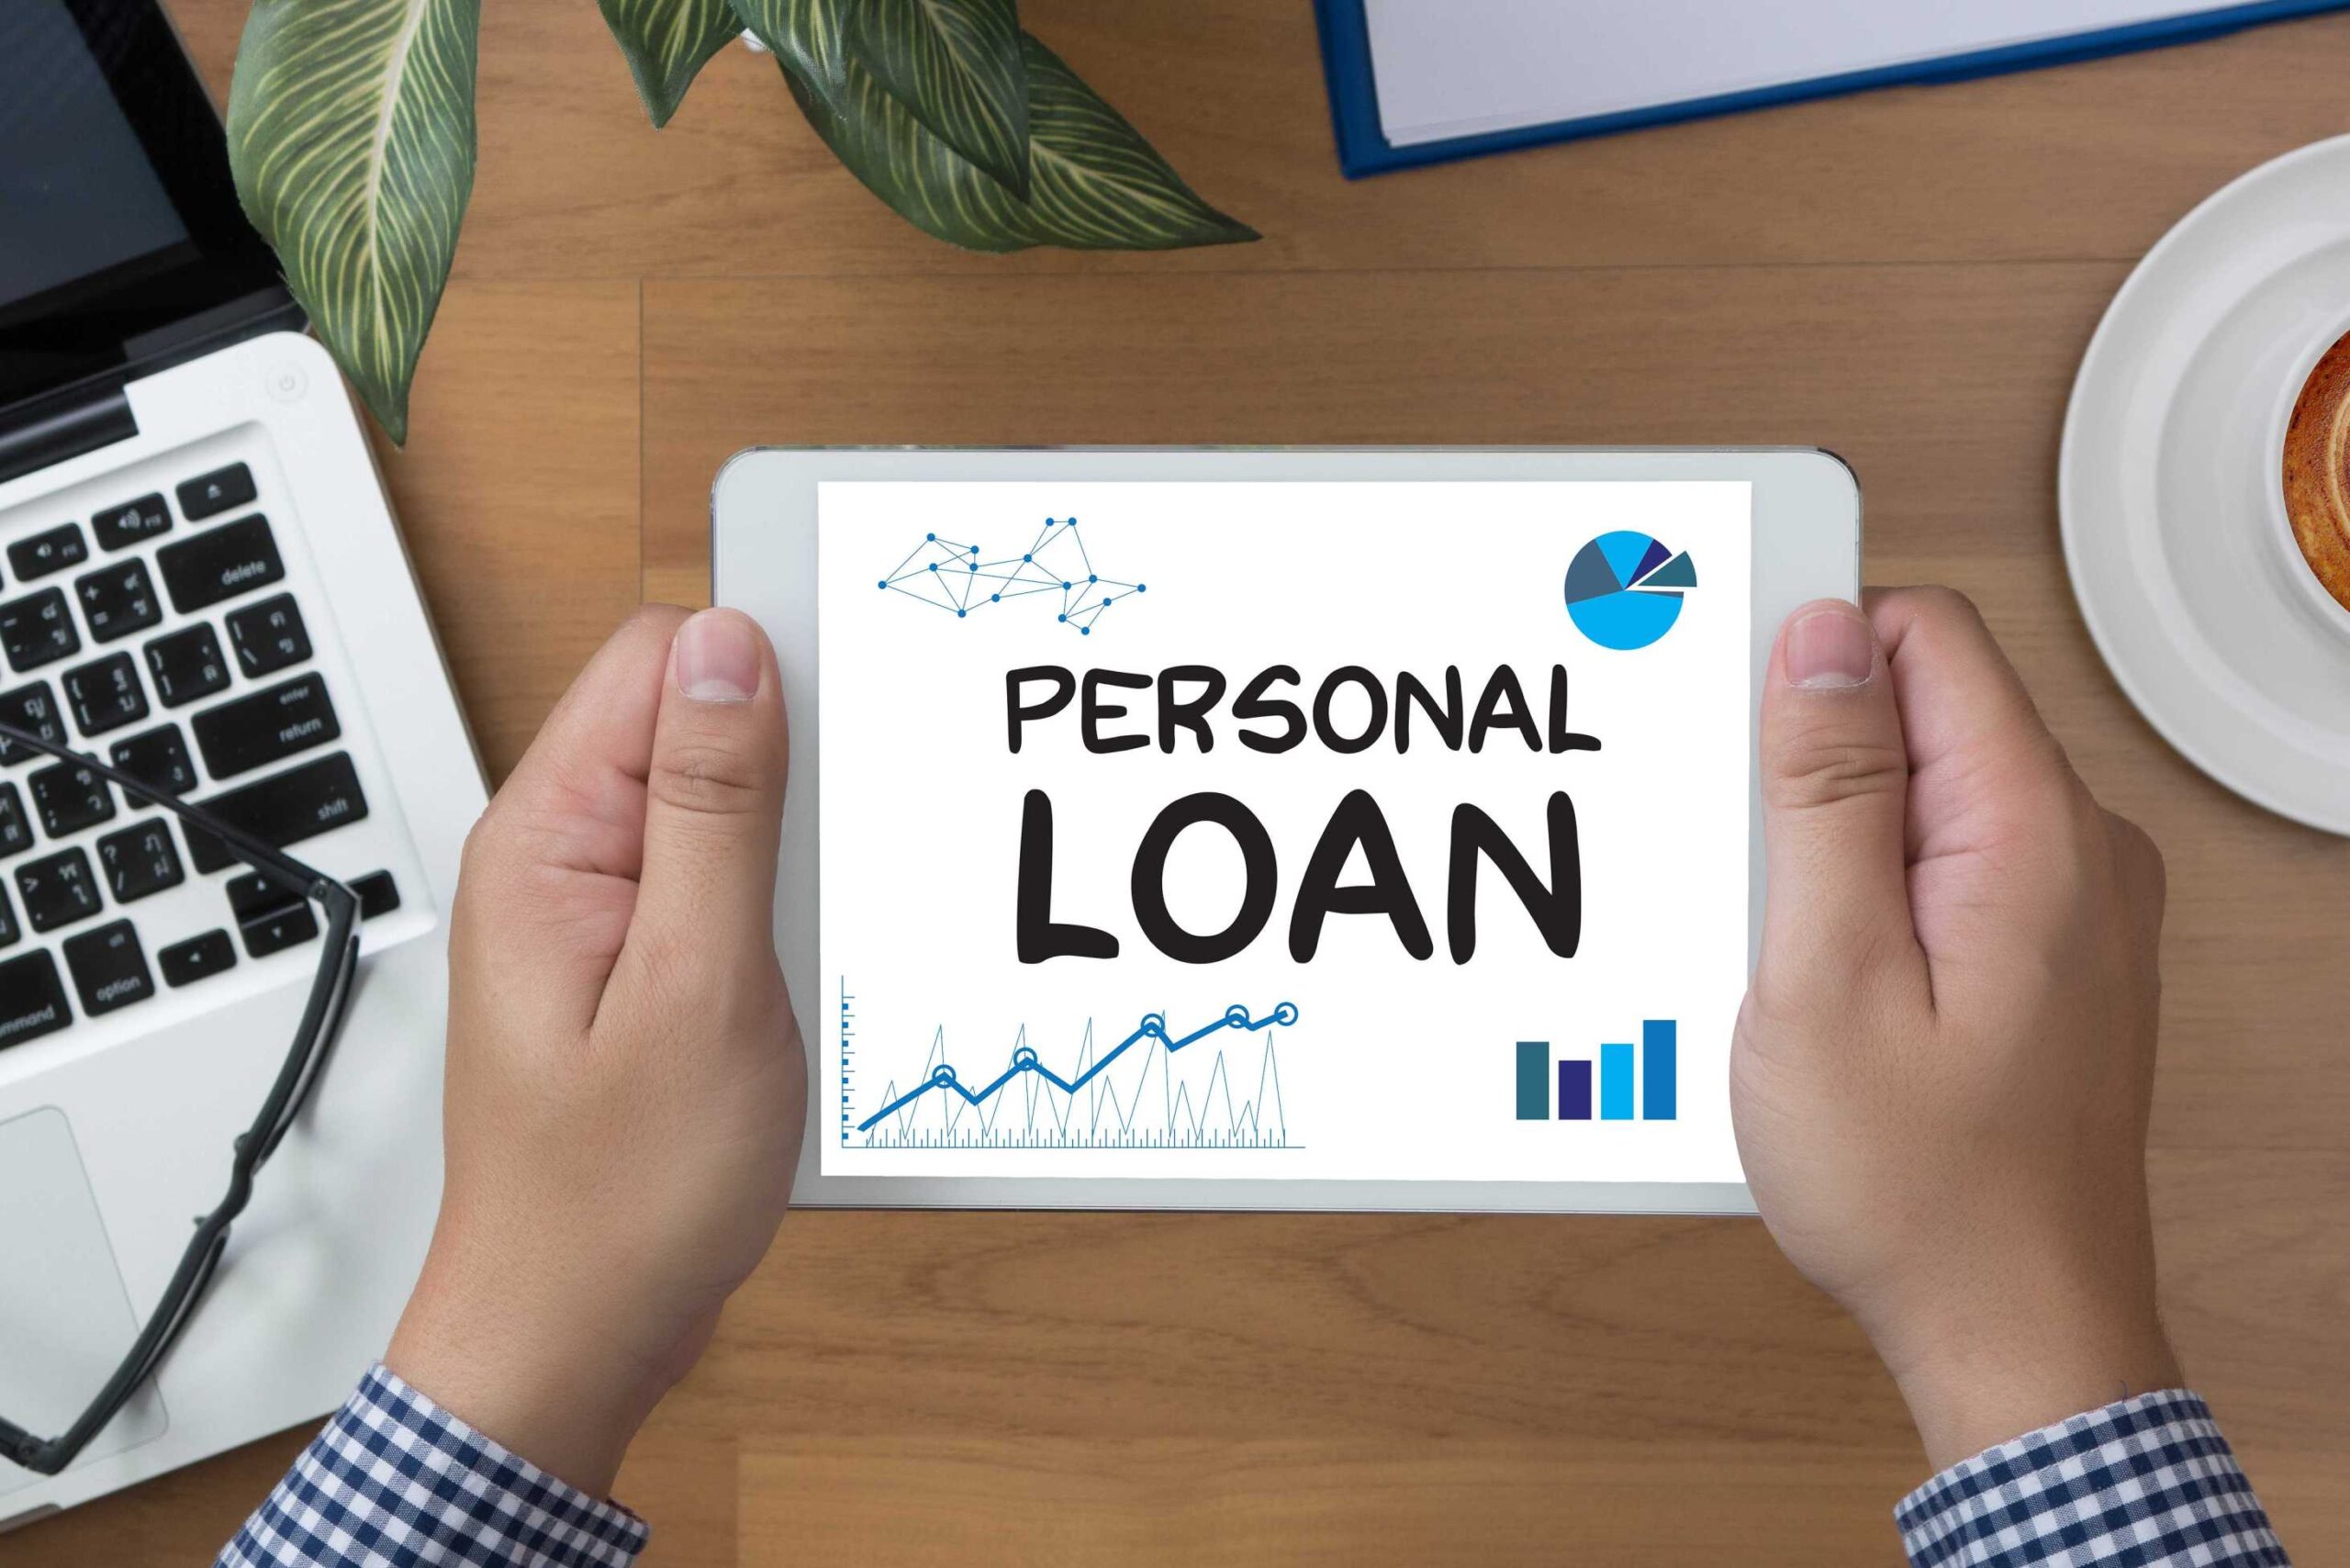 All You Should Know About Pre-Approved Personal Loans